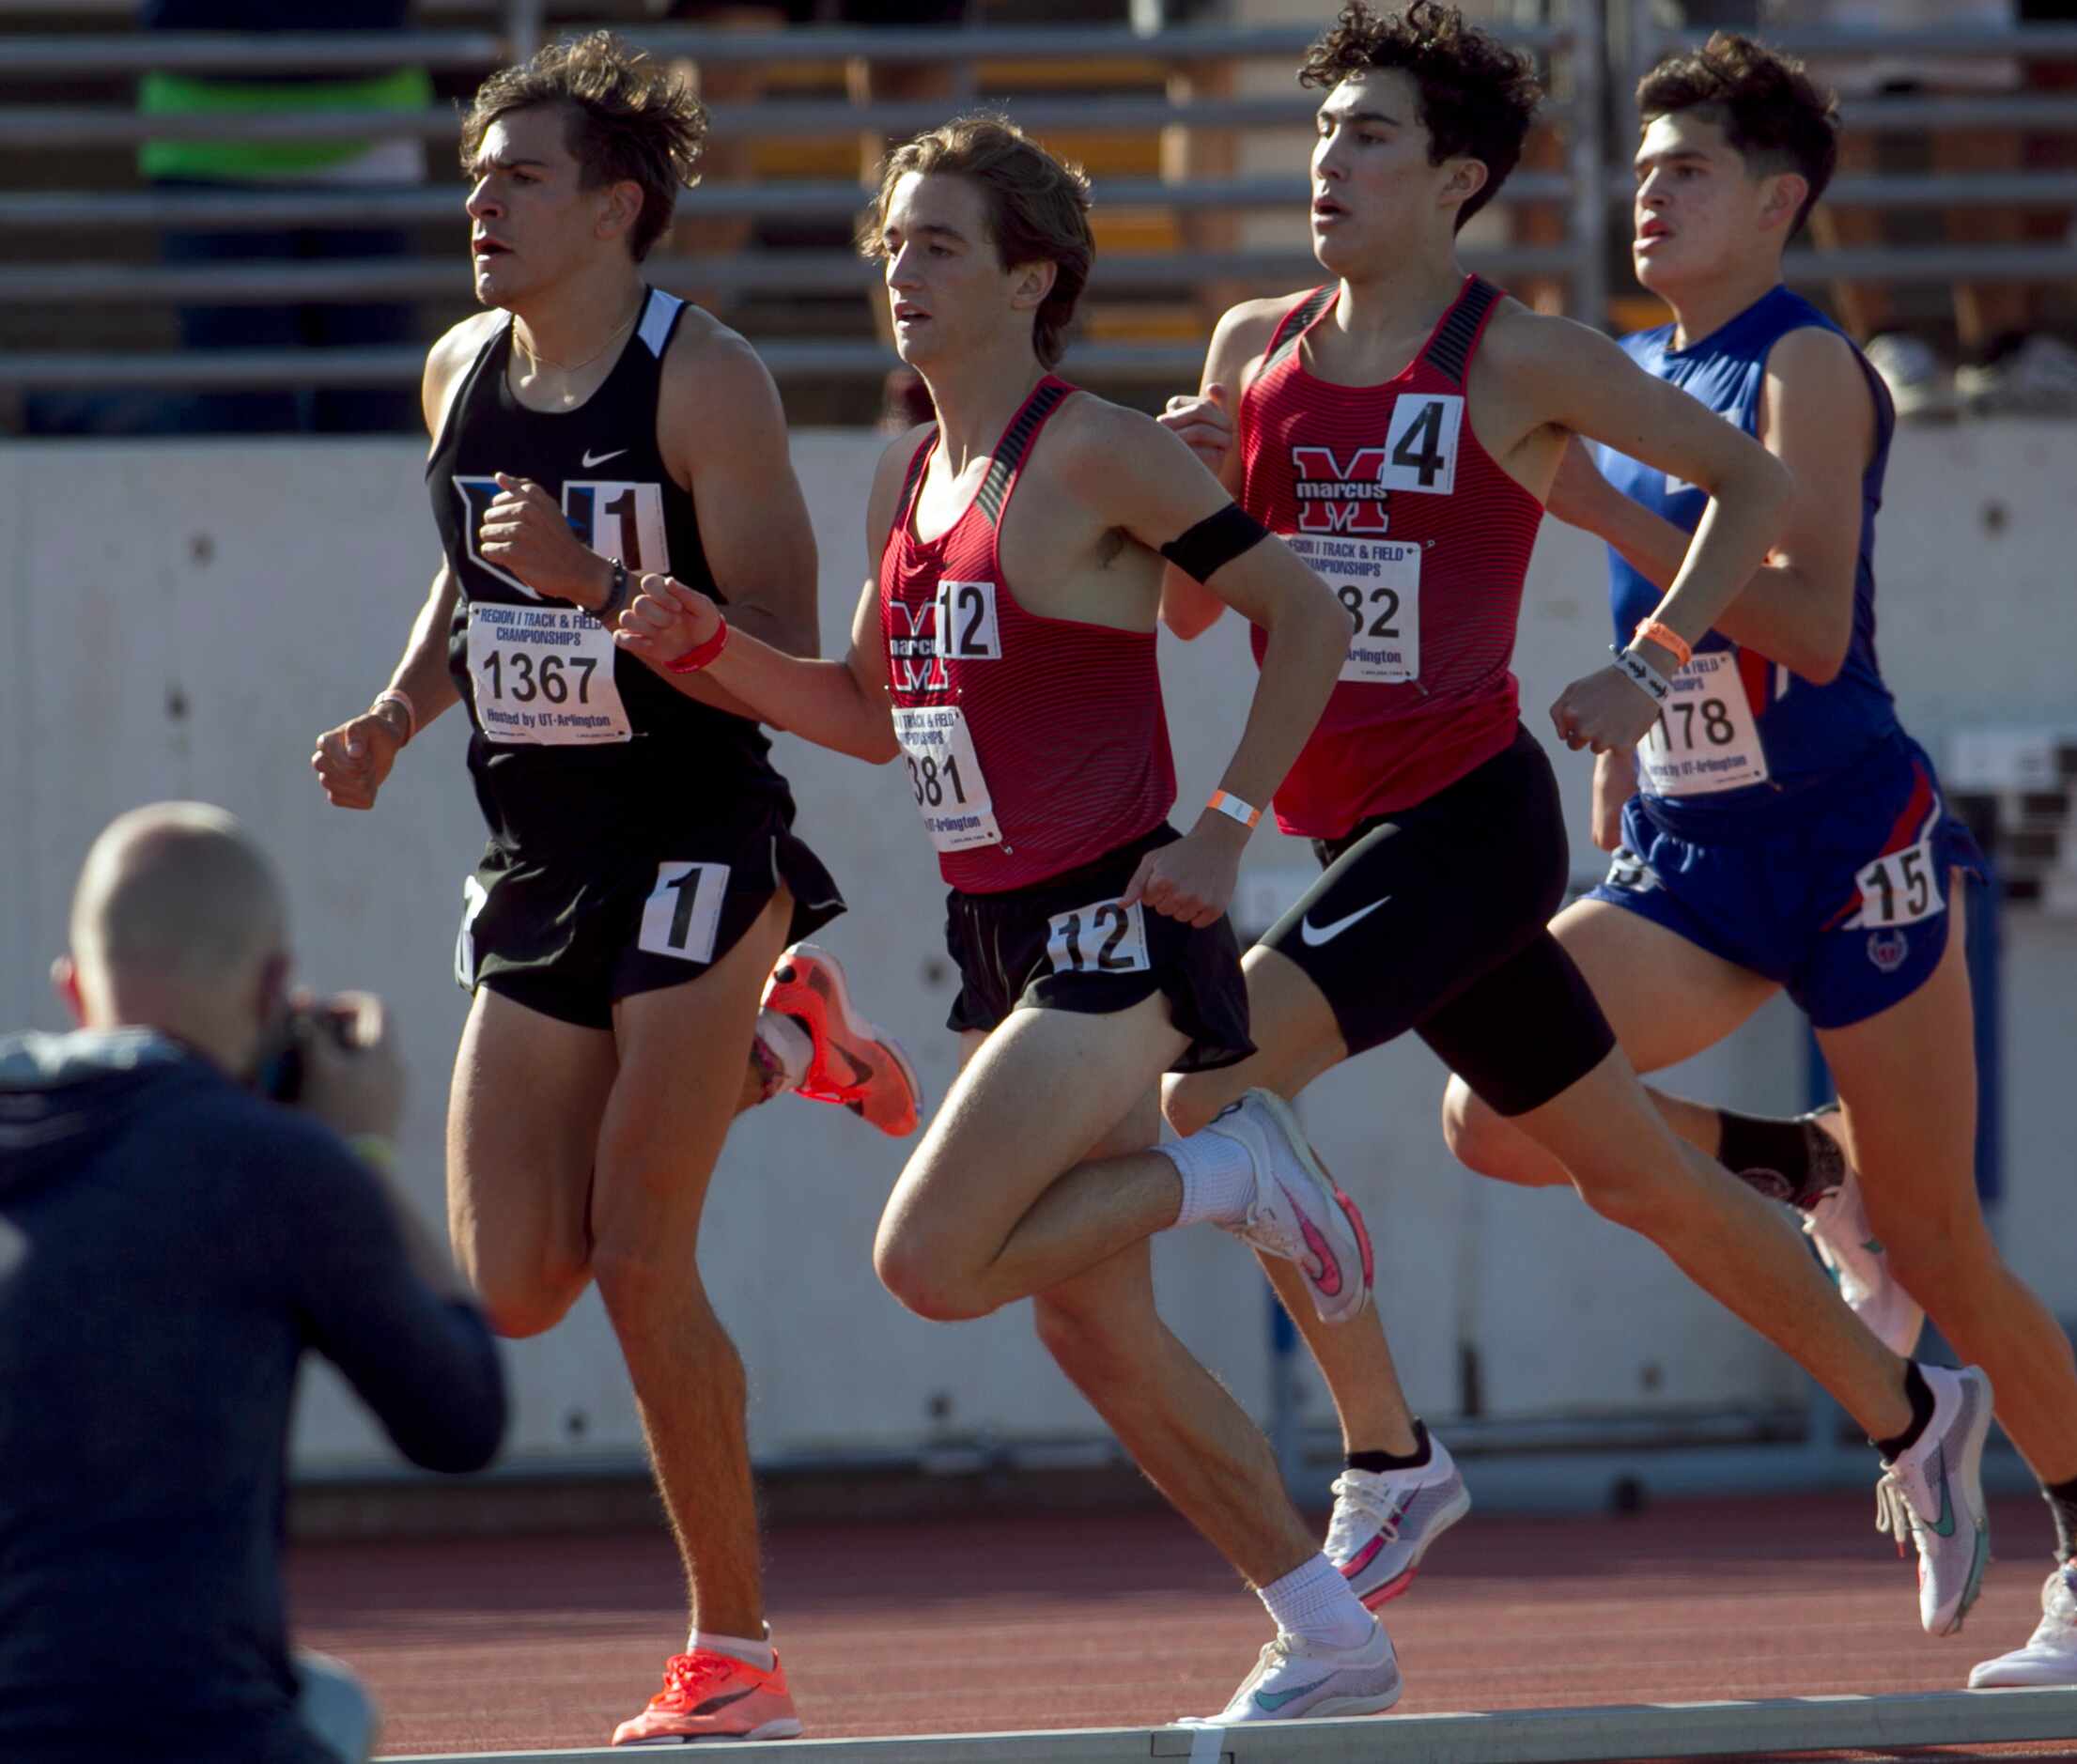 The competition was competitive in the Class 6A Boys 800 Meter Run event. From left are...